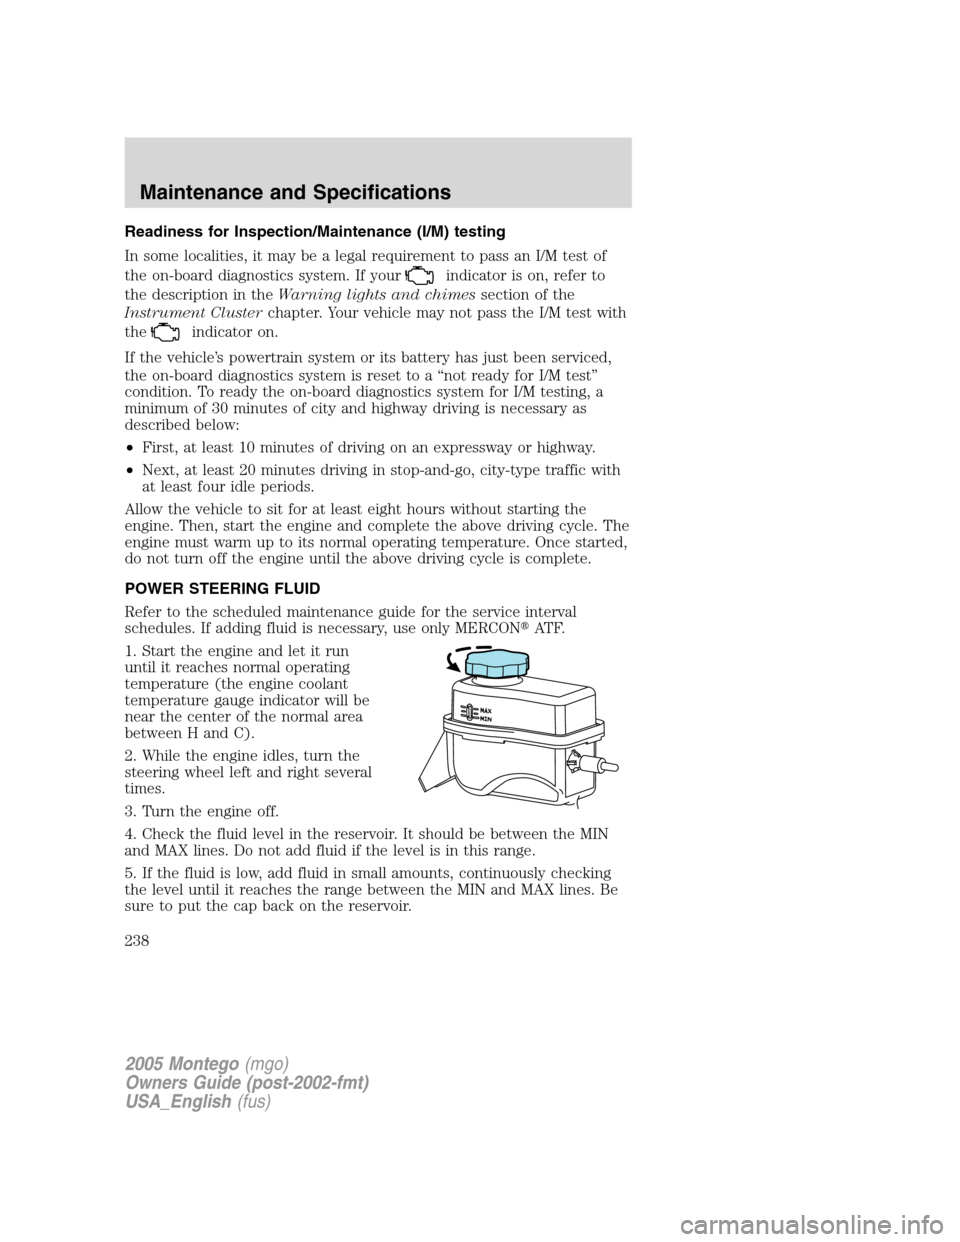 Mercury Montego 2005  Owners Manuals Readiness for Inspection/Maintenance (I/M) testing
In some localities, it may be a legal requirement to pass an I/M test of
the on-board diagnostics system. If your
indicator is on, refer to
the descr